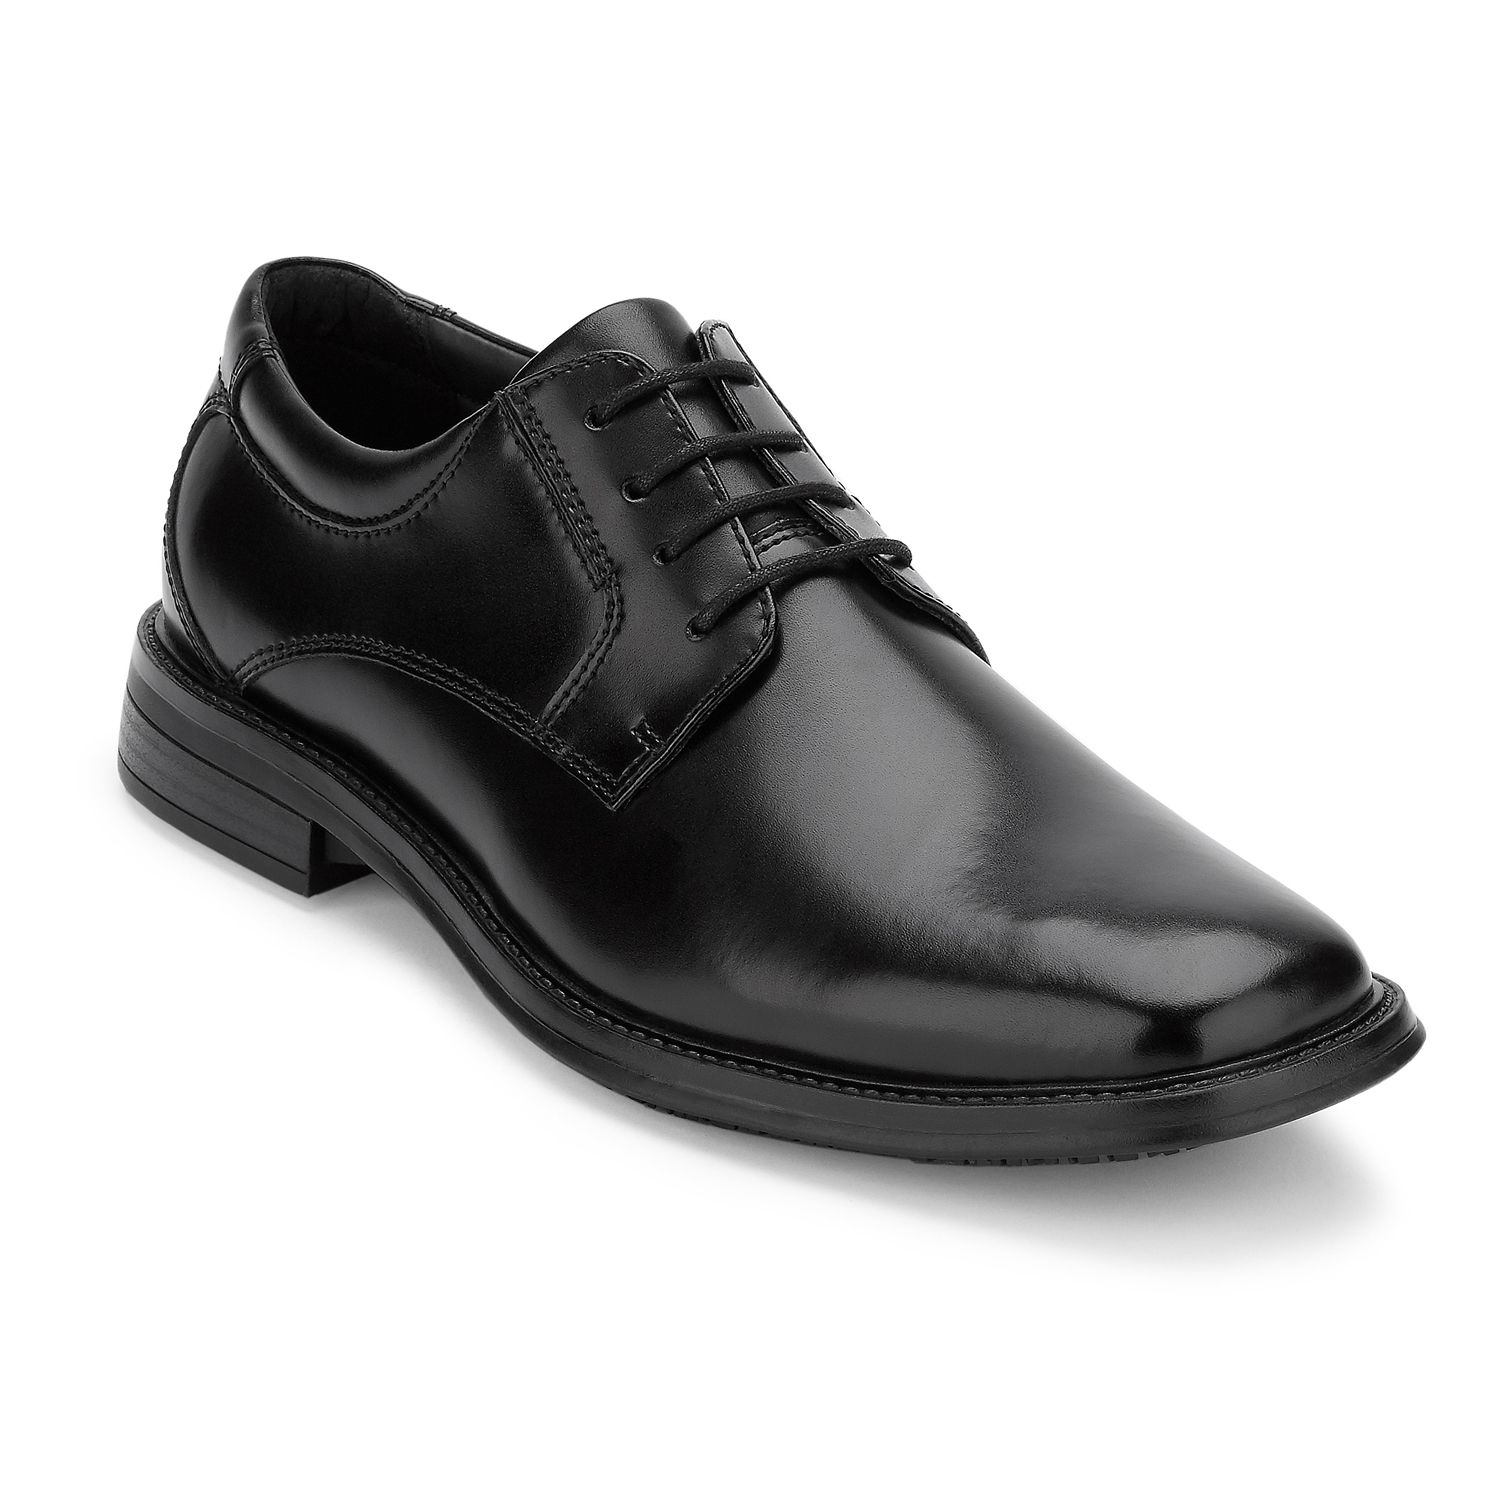 Water Resistant Non-Slip Oxford Shoes